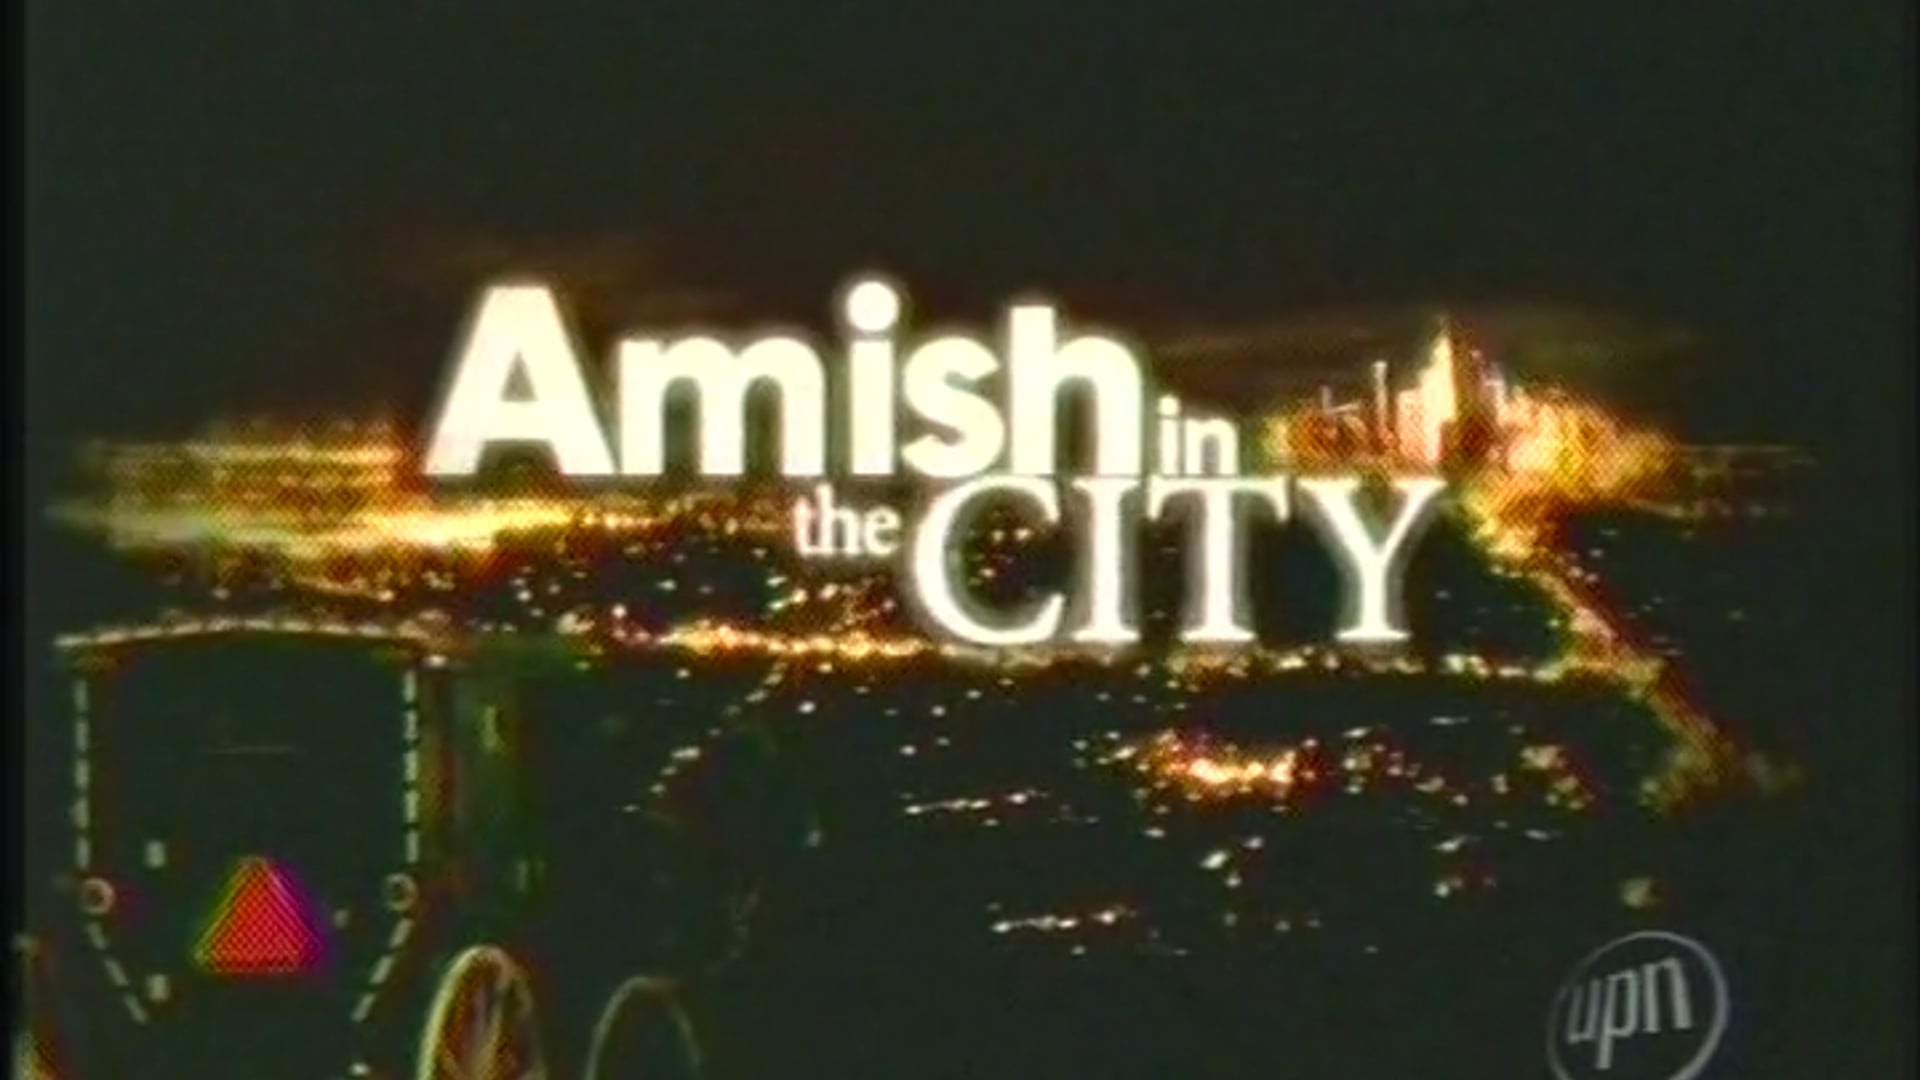 AMISH IN THE CITY